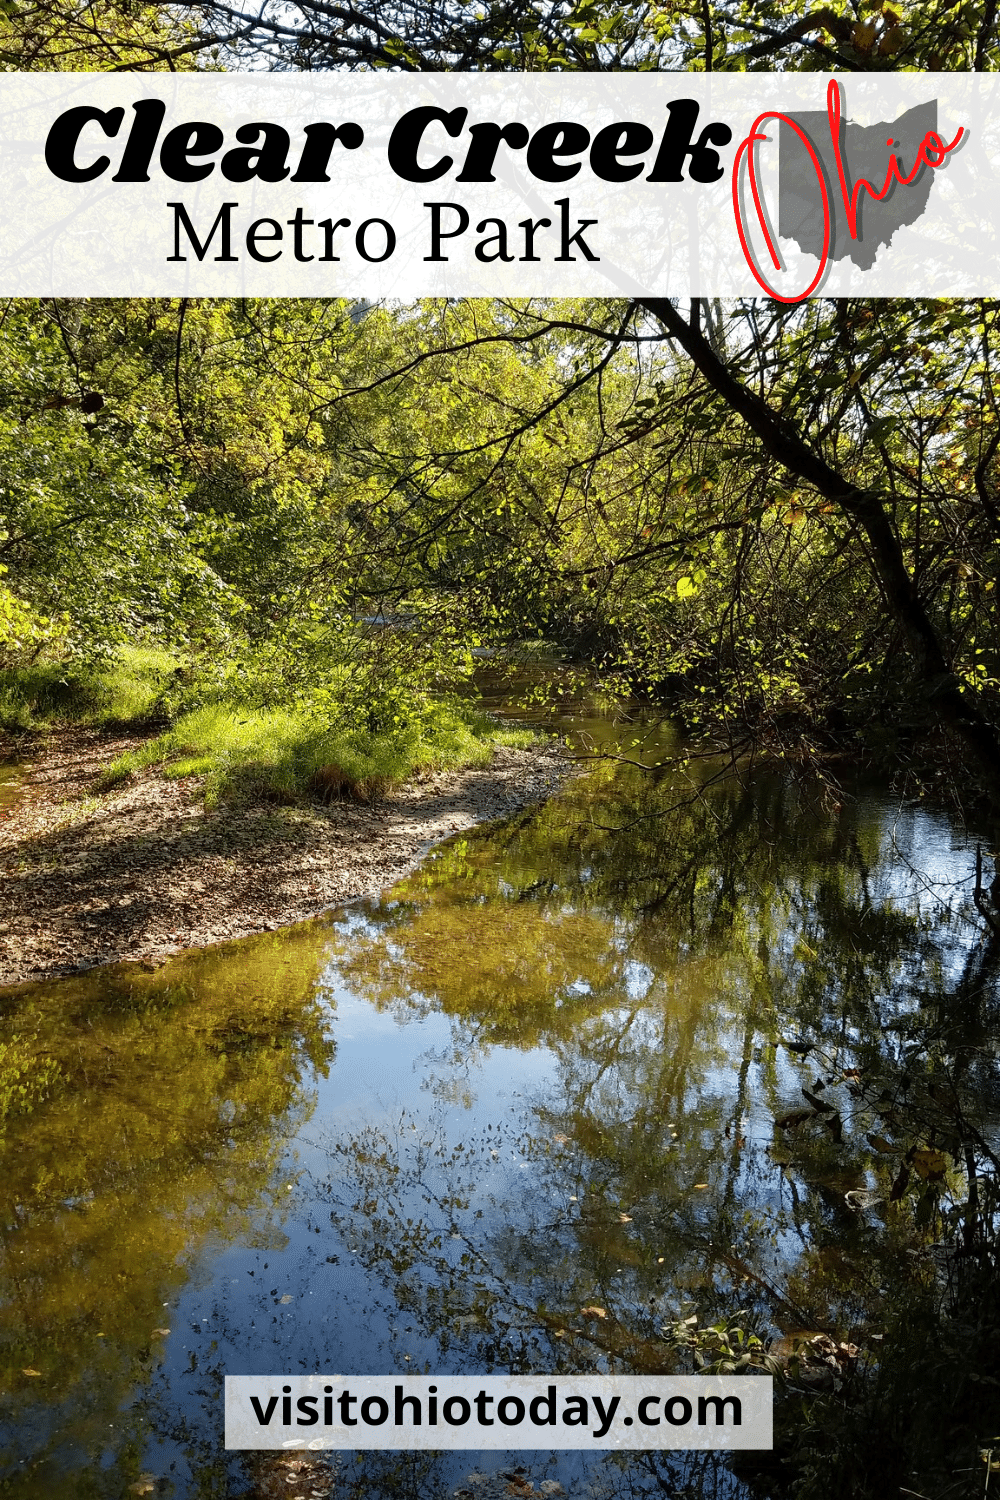 Clear Creek Metro Park consists of over 5,300 acres of woodland, with blackhand sandstone cliffs, ravines and creeks